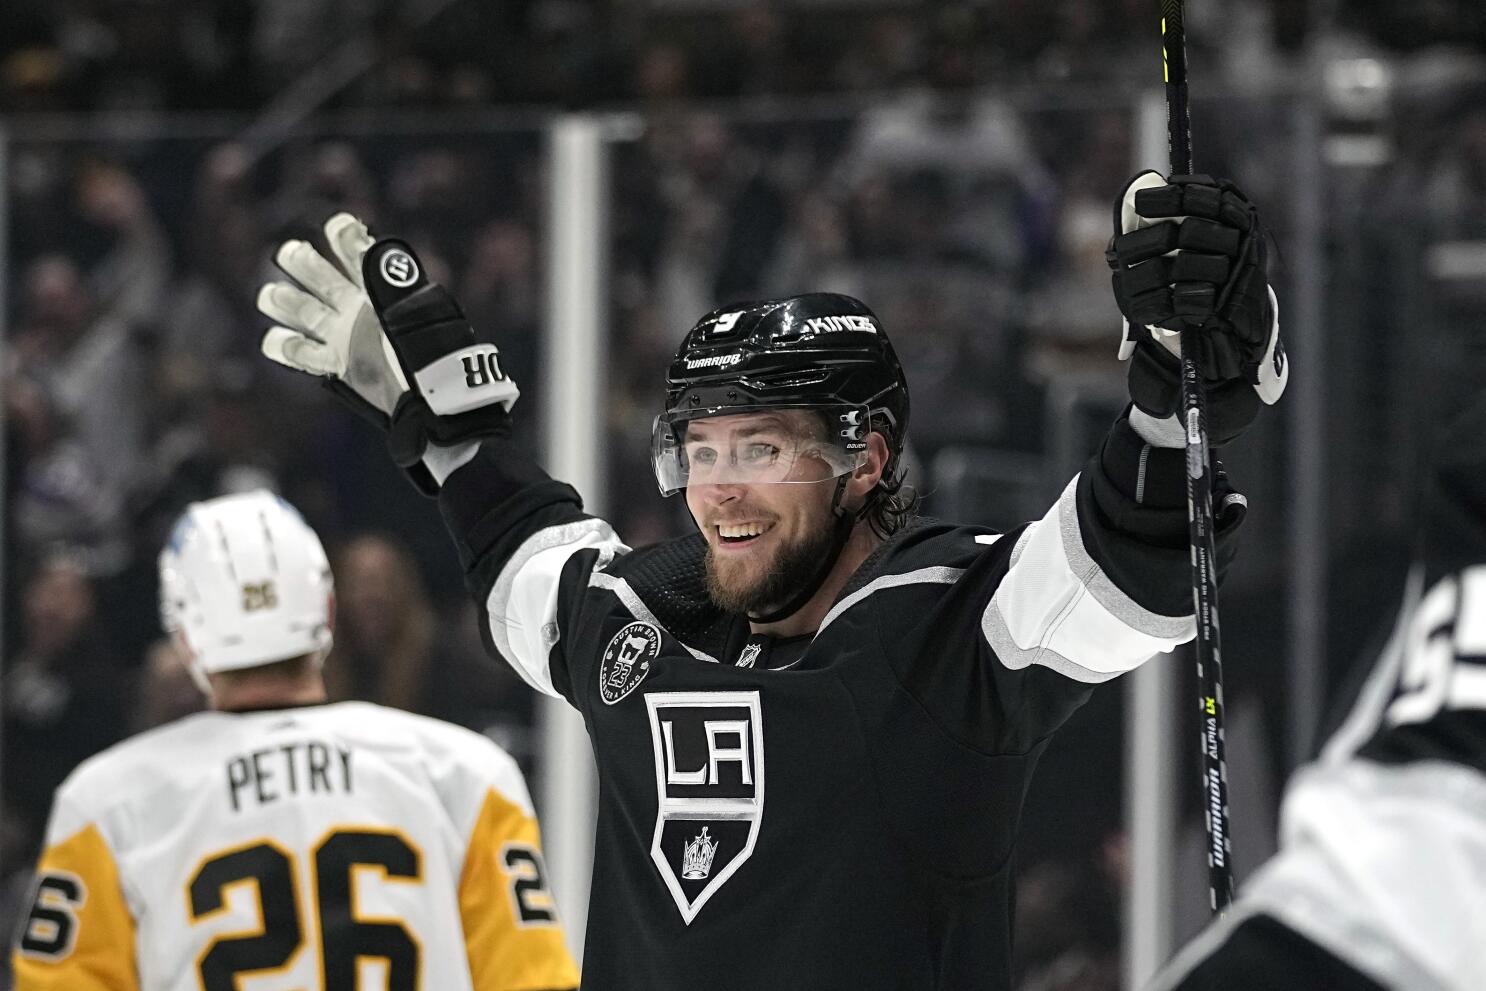 Adrian Kempe scores 4 goals as Kings blank Penguins – Daily News